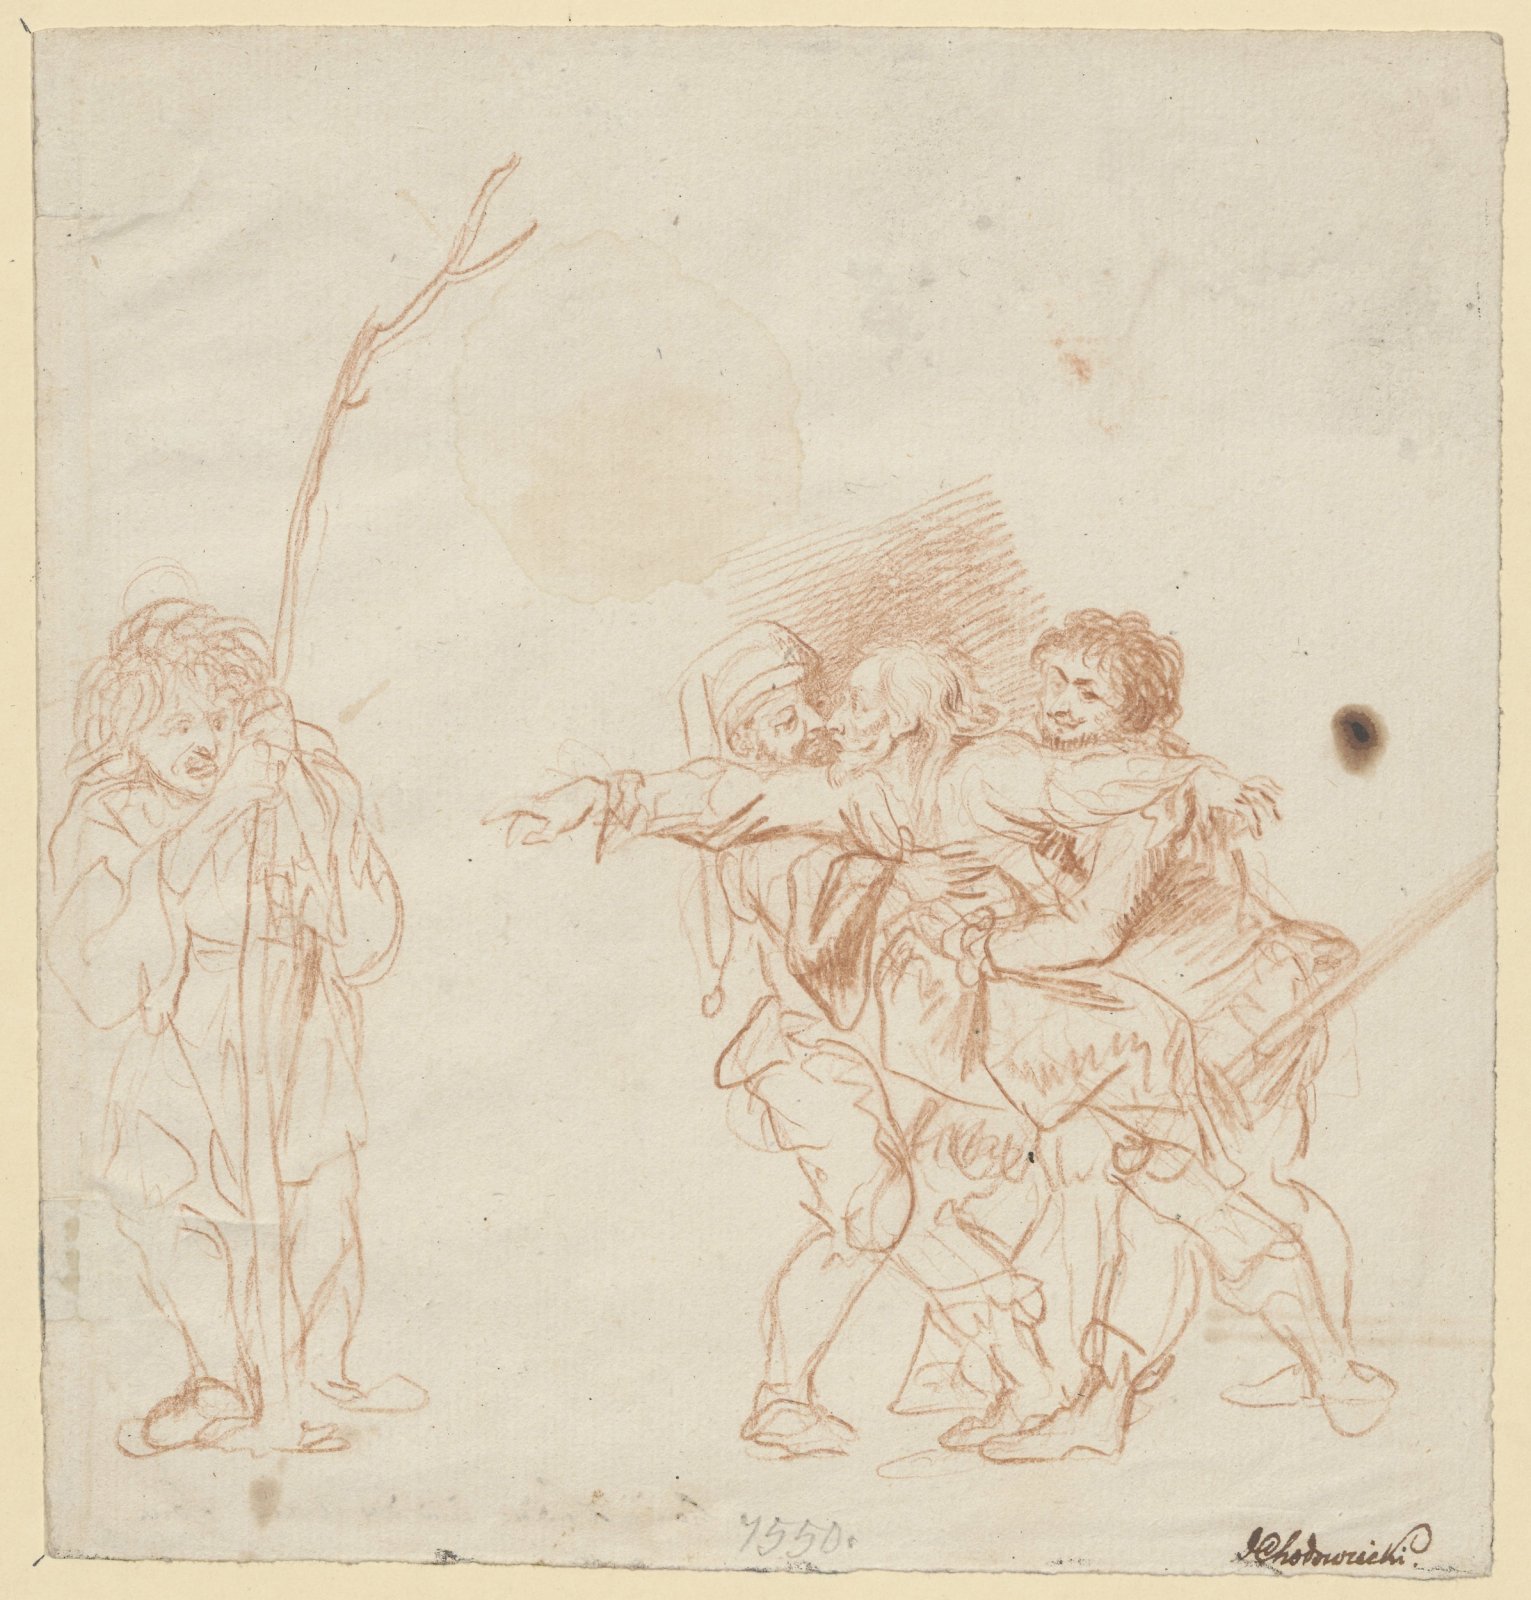 Daniel Nicolaus Chodowiecki, Scene from King Lear, drawing, before 1800, collection of the National Museum in Warsaw.